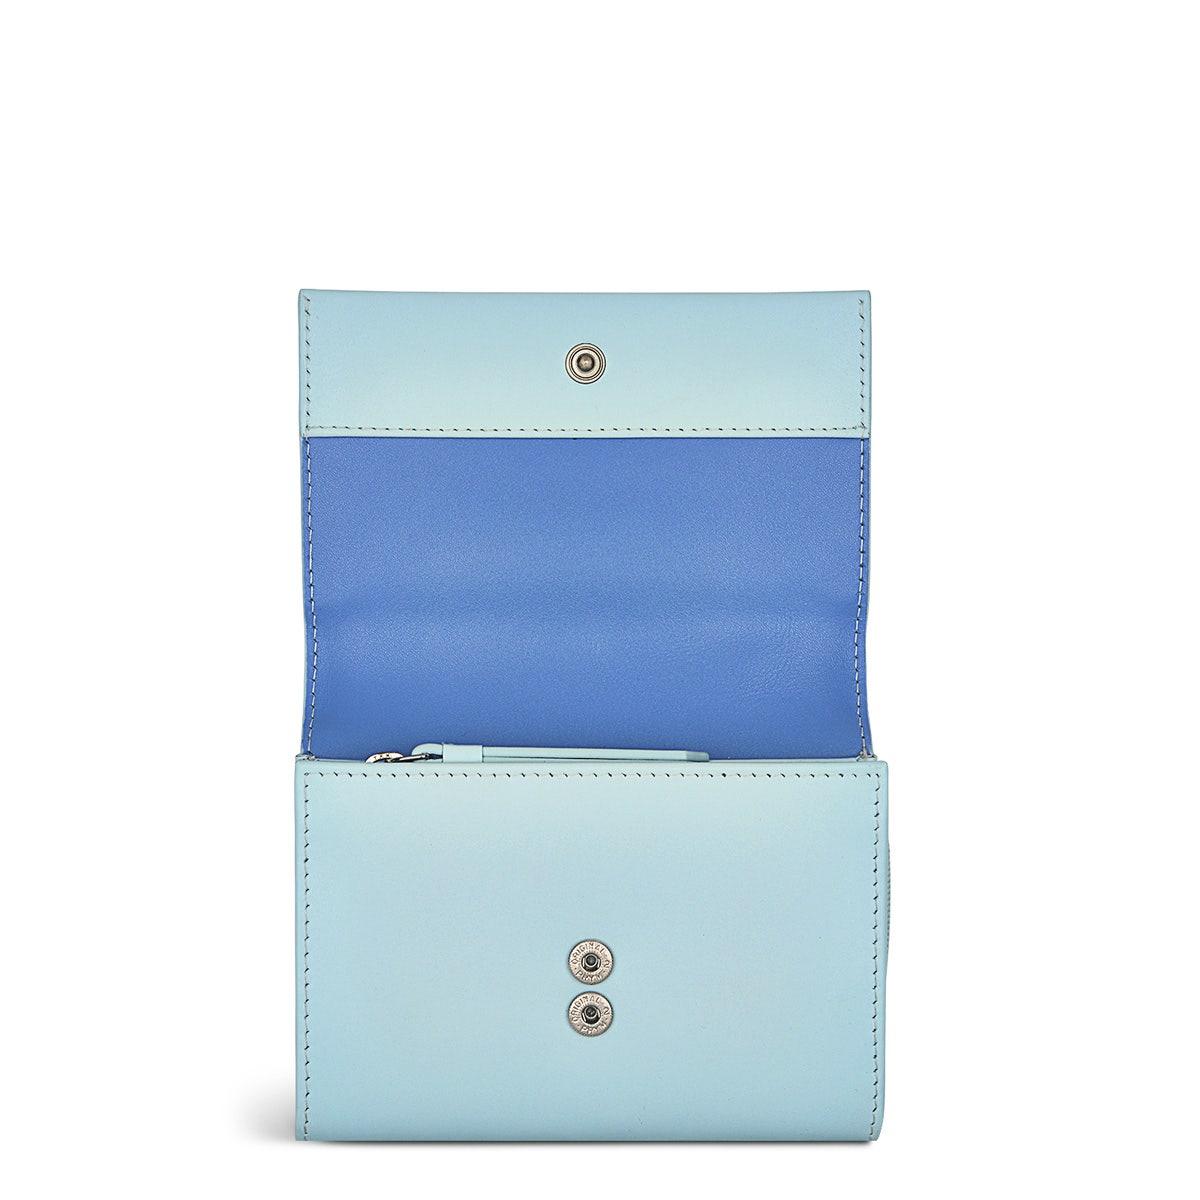 REFLECTIONS - Medium Flapover Purse - RUTHERFORD & Co